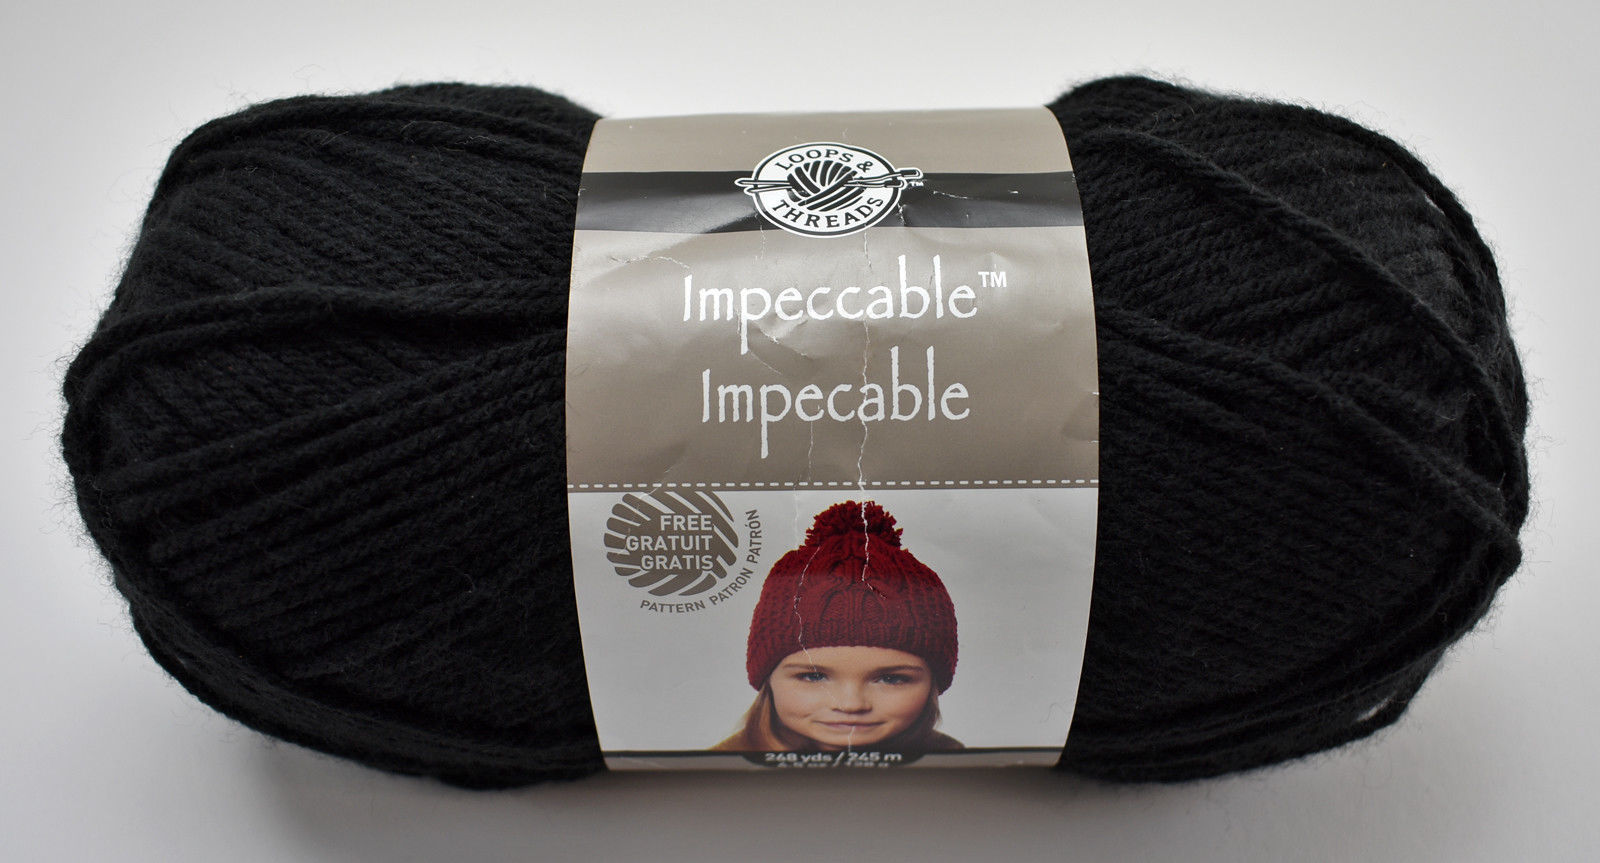 Loops & Threads Impeccable Medium Weight Acrylic Yarn - 1 Skein Color Black - $7.55